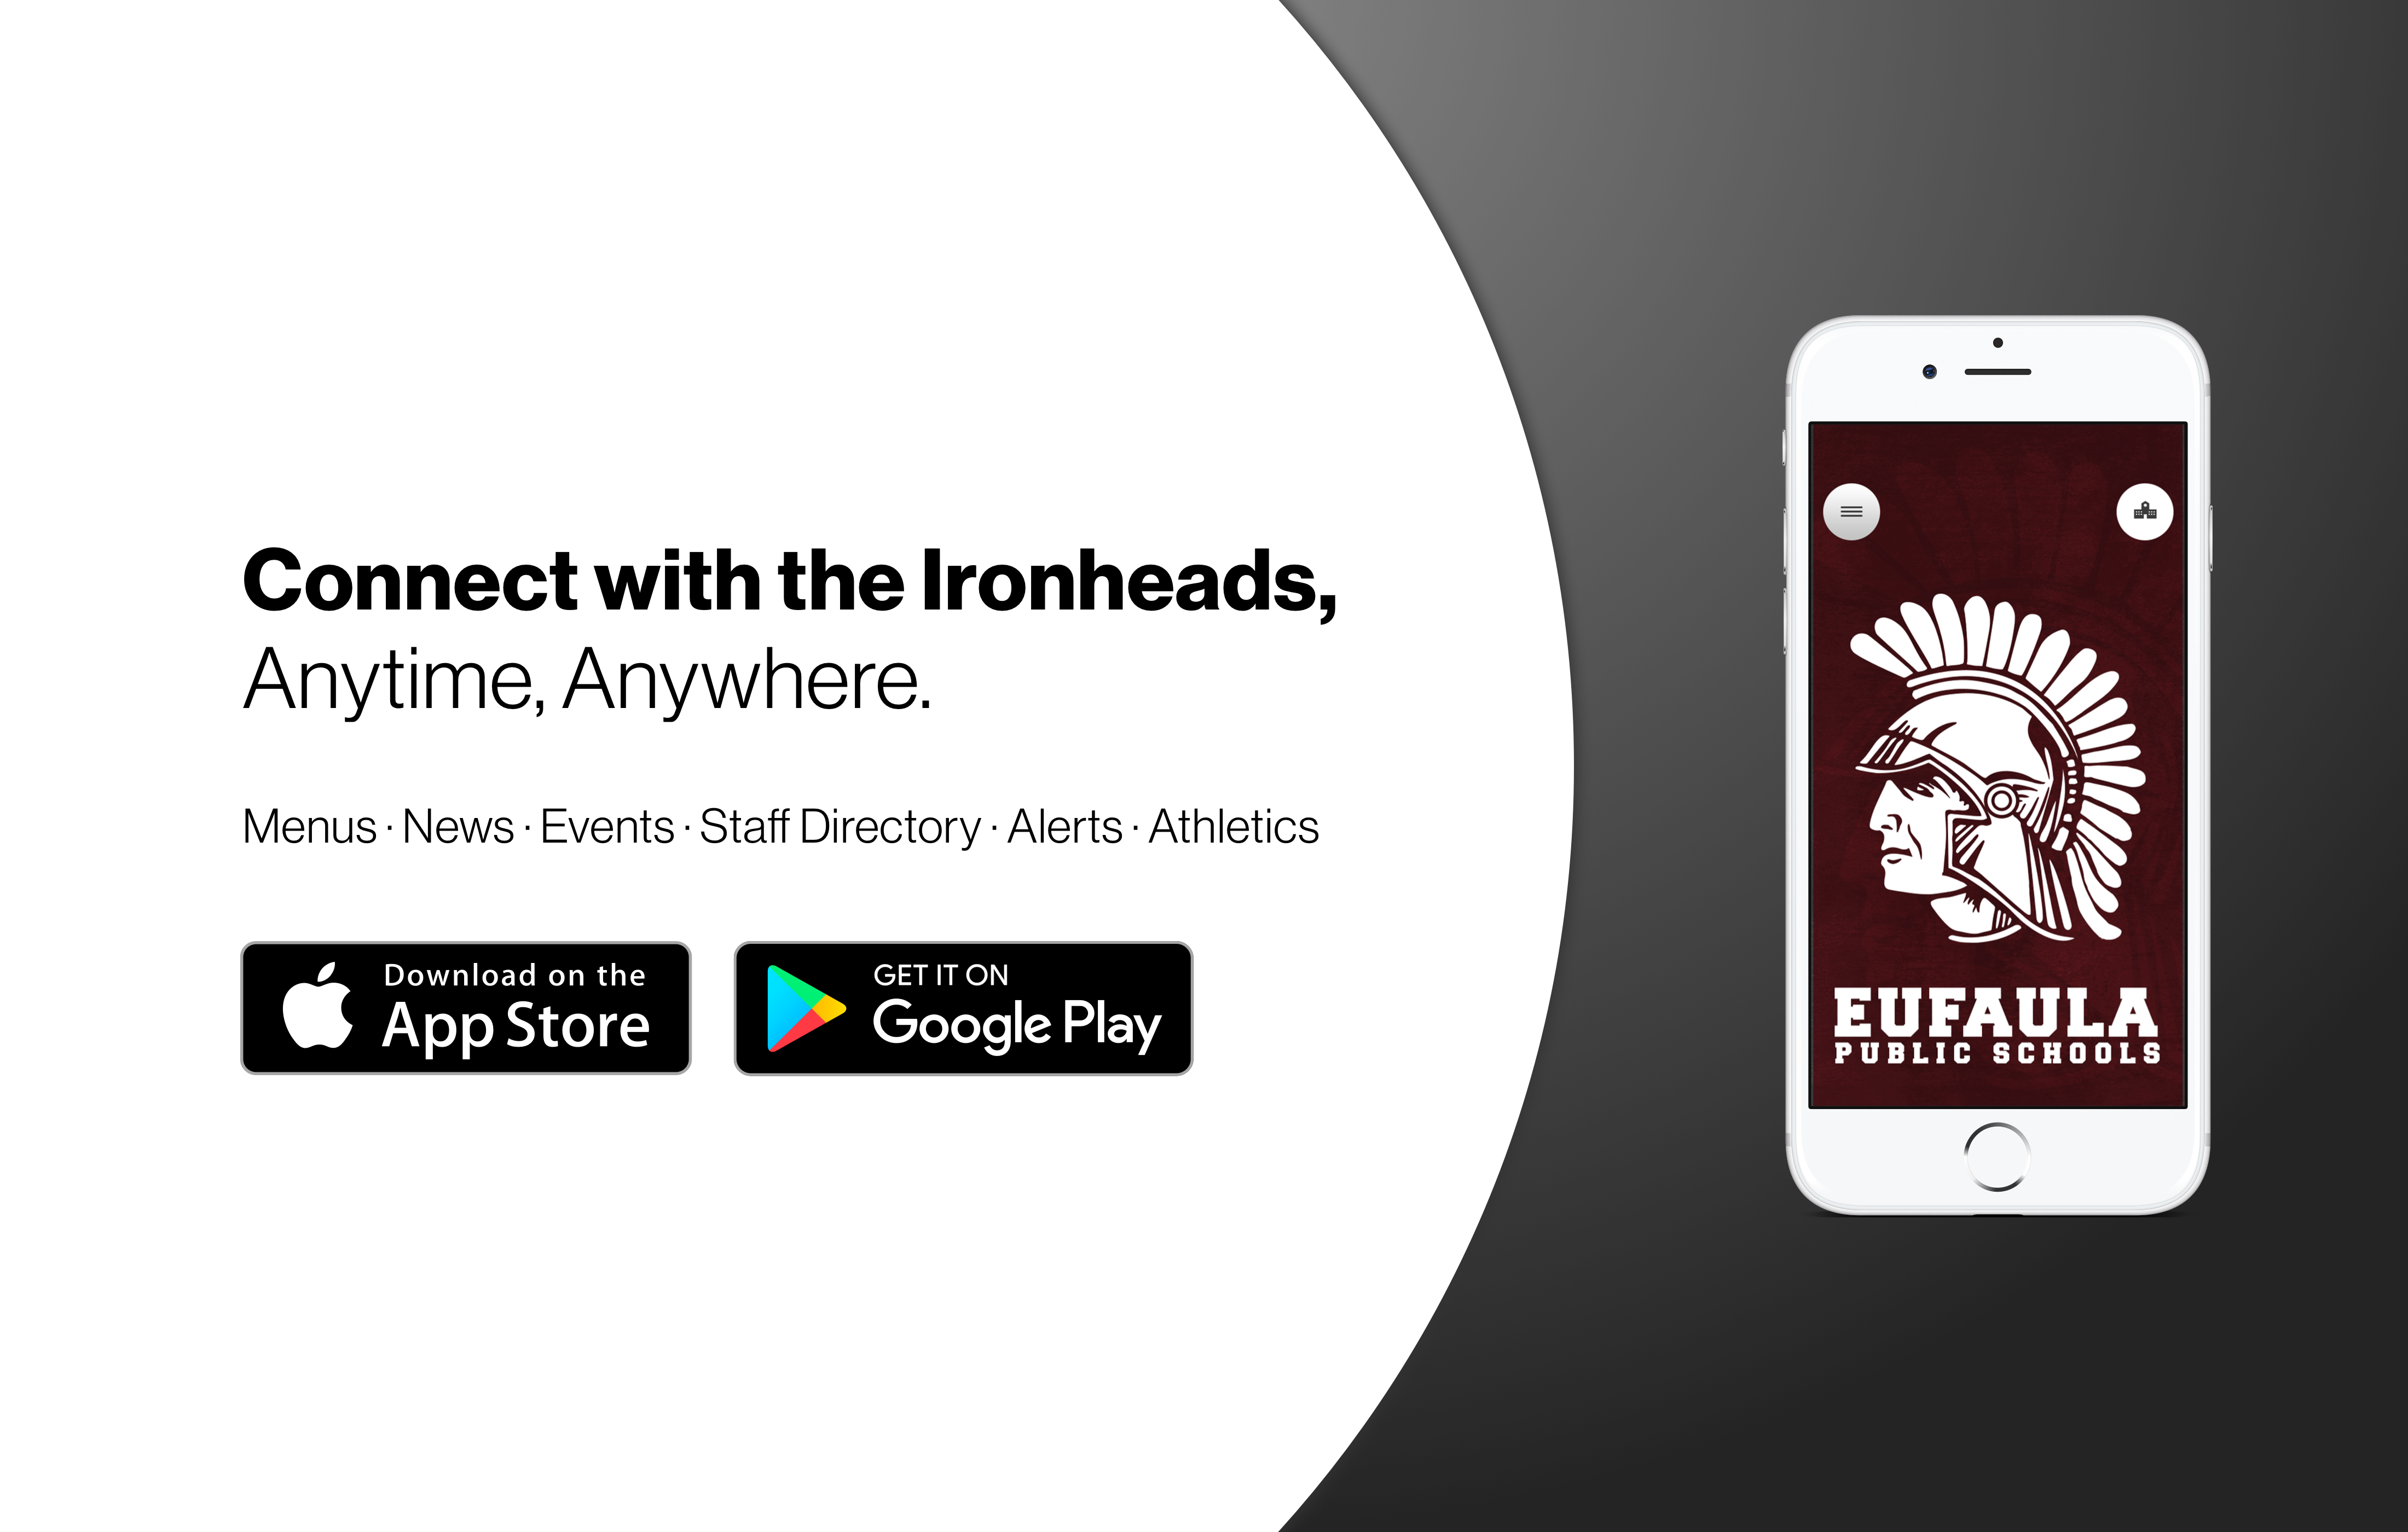 Connect with the Ironheads, Anytime, Anywhere.